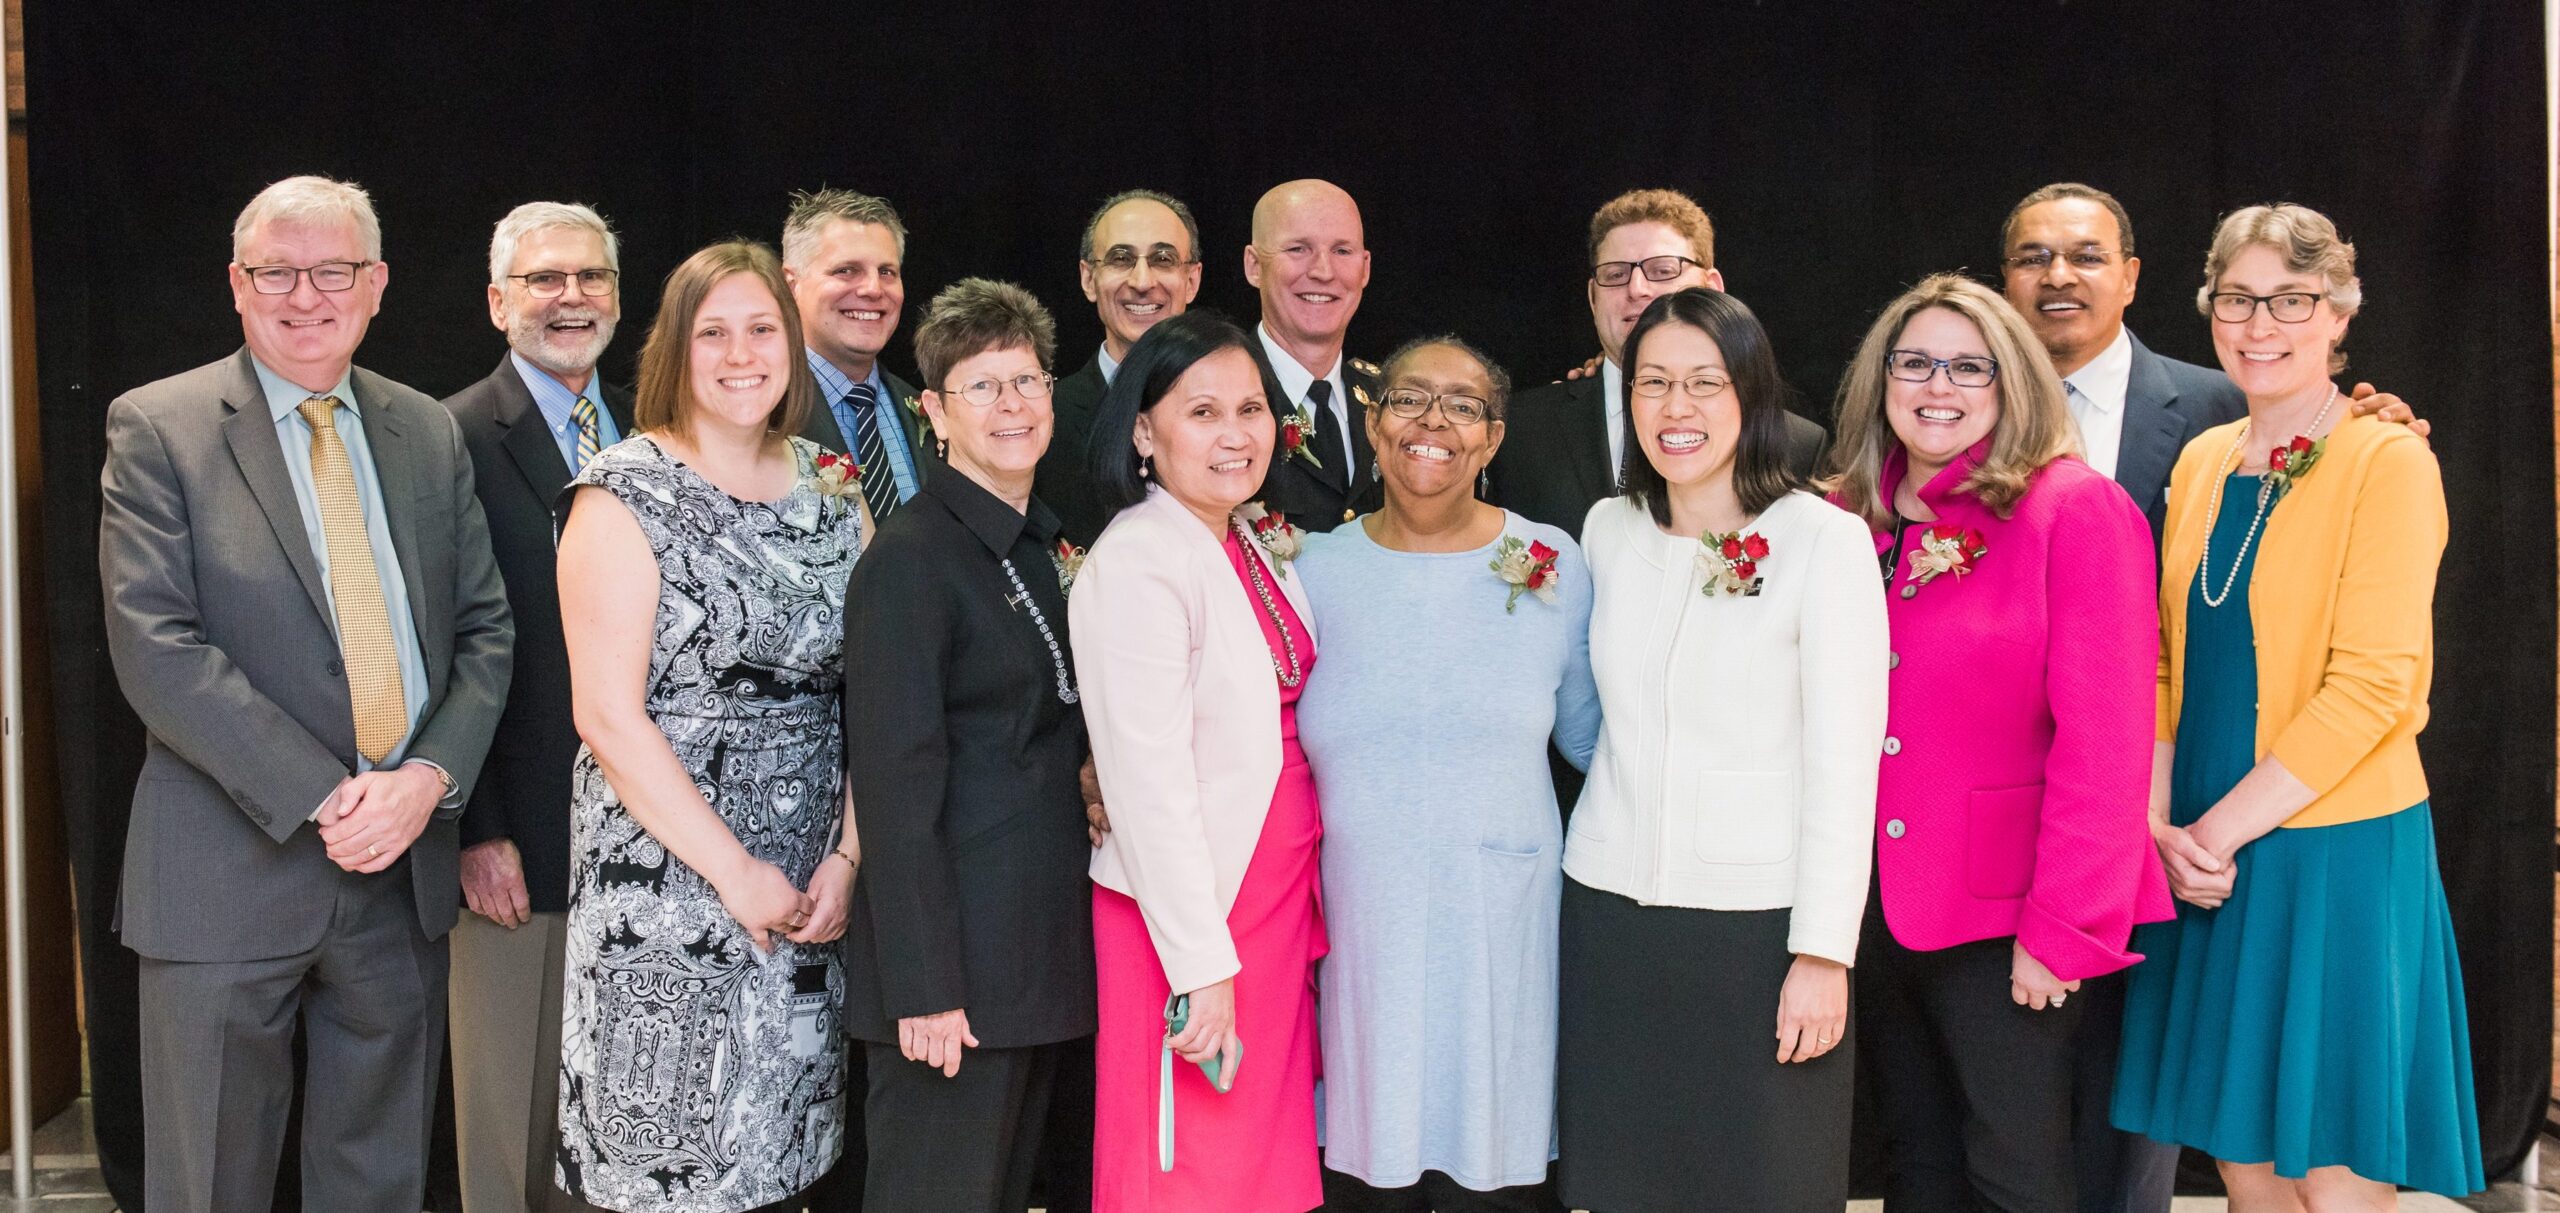 2017 UMBC Presidential Faculty and Staff Award recipients